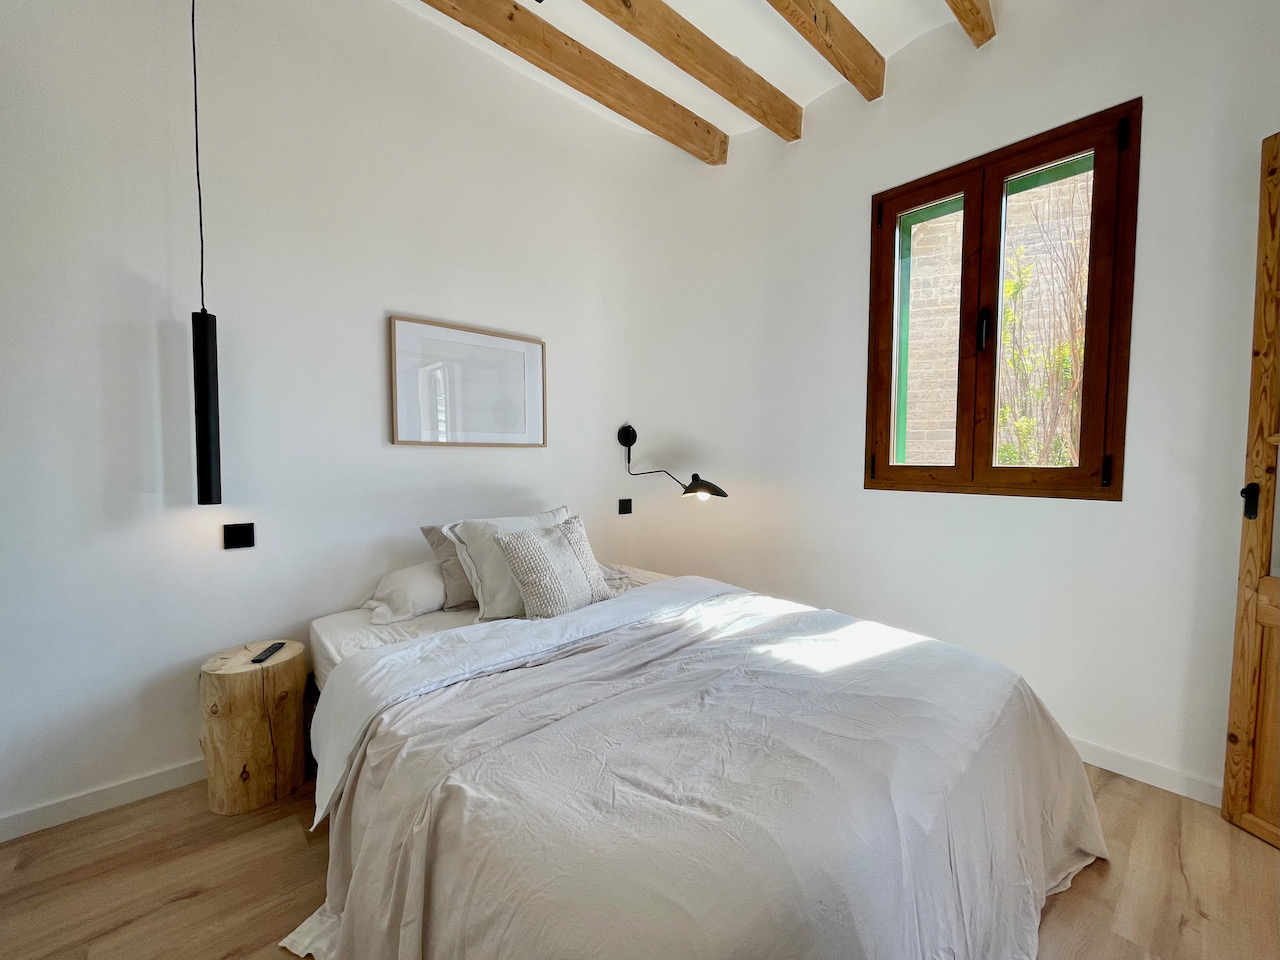 Charming flat in Santa Catalina, refurbished, sunny and with views to the church.